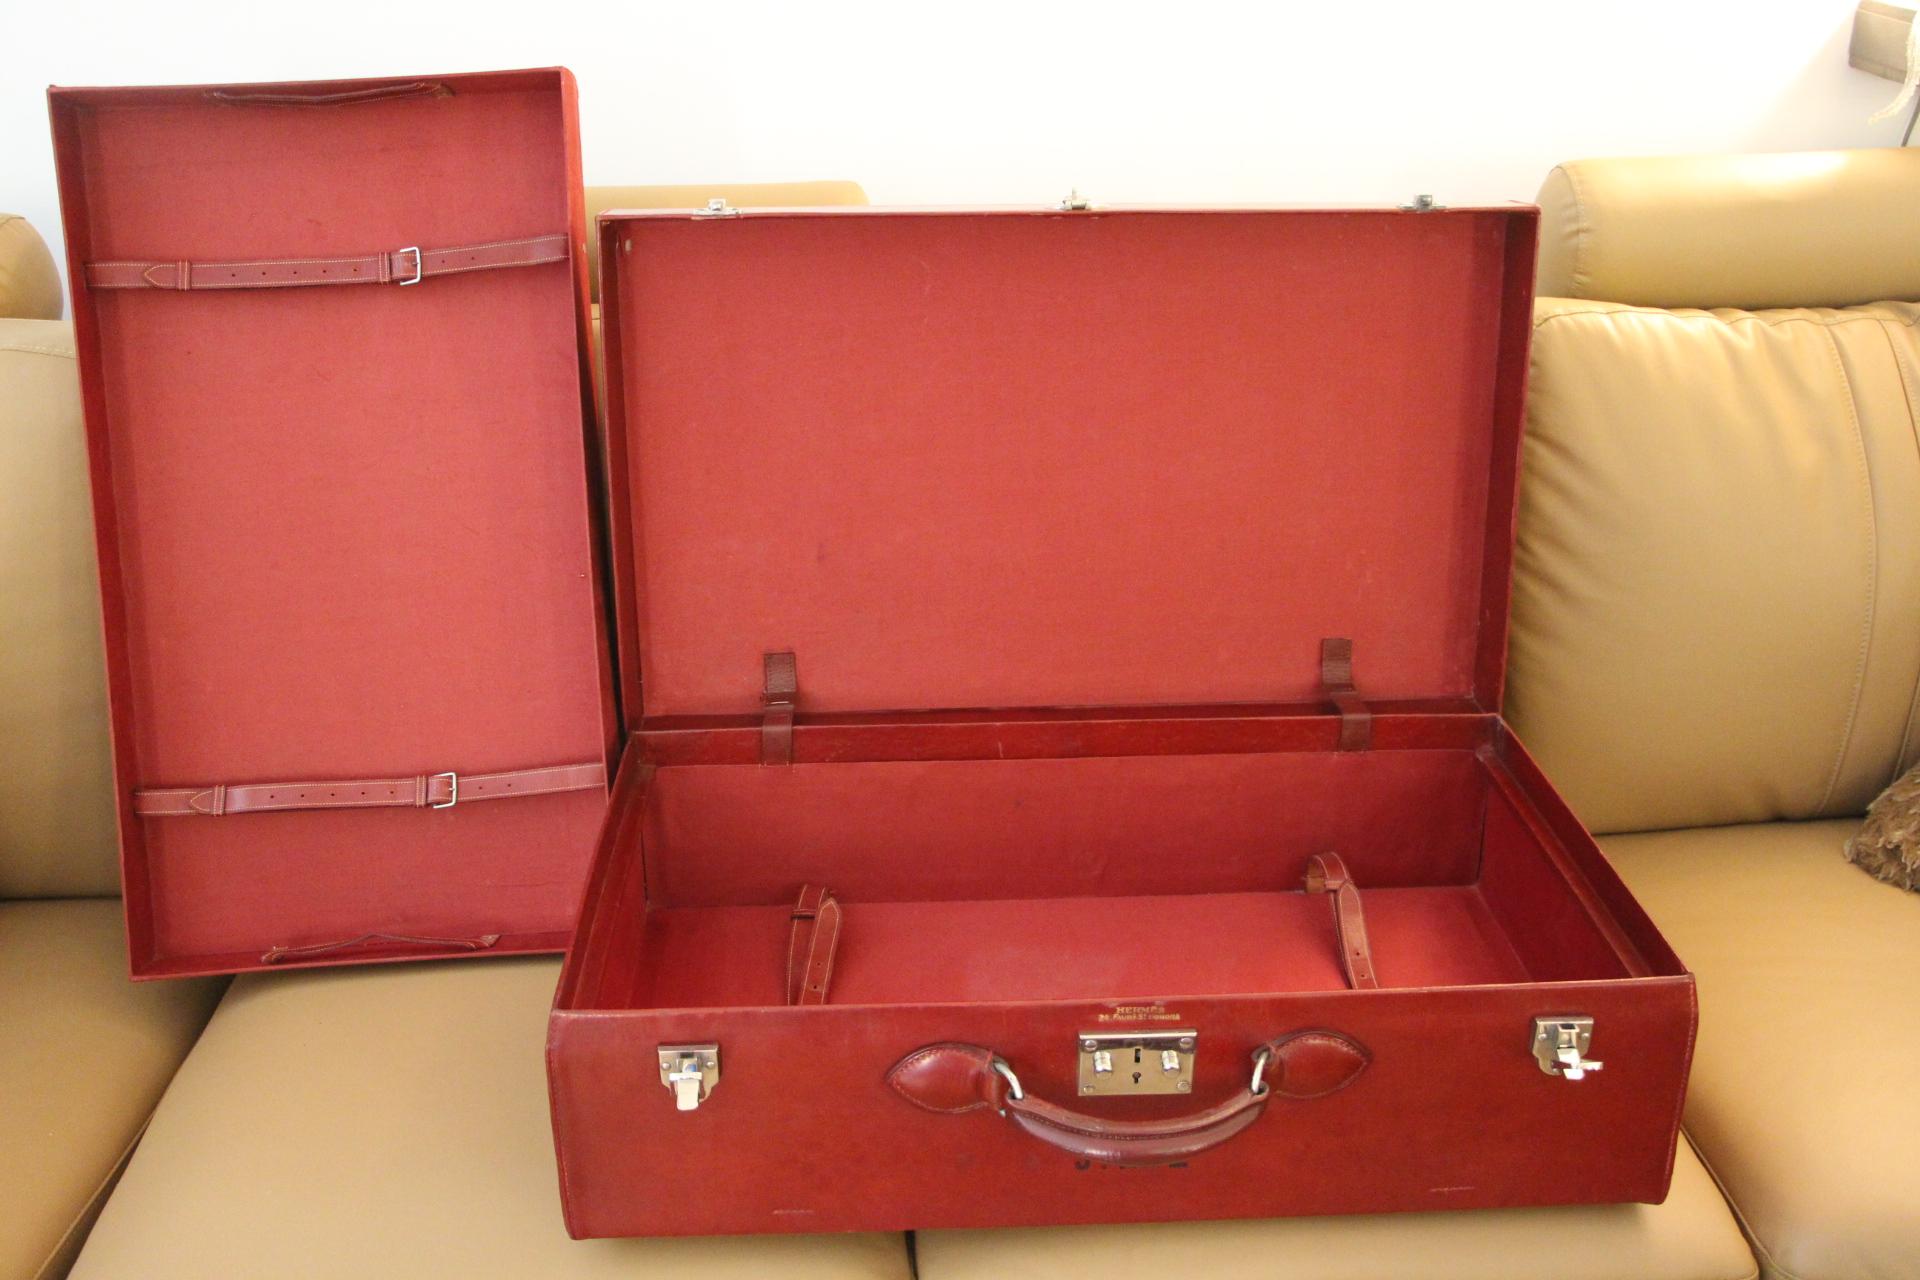 Red Leather Hermes Suitcase 70 cm, Hermes Trunk, Hermes Luggage 9